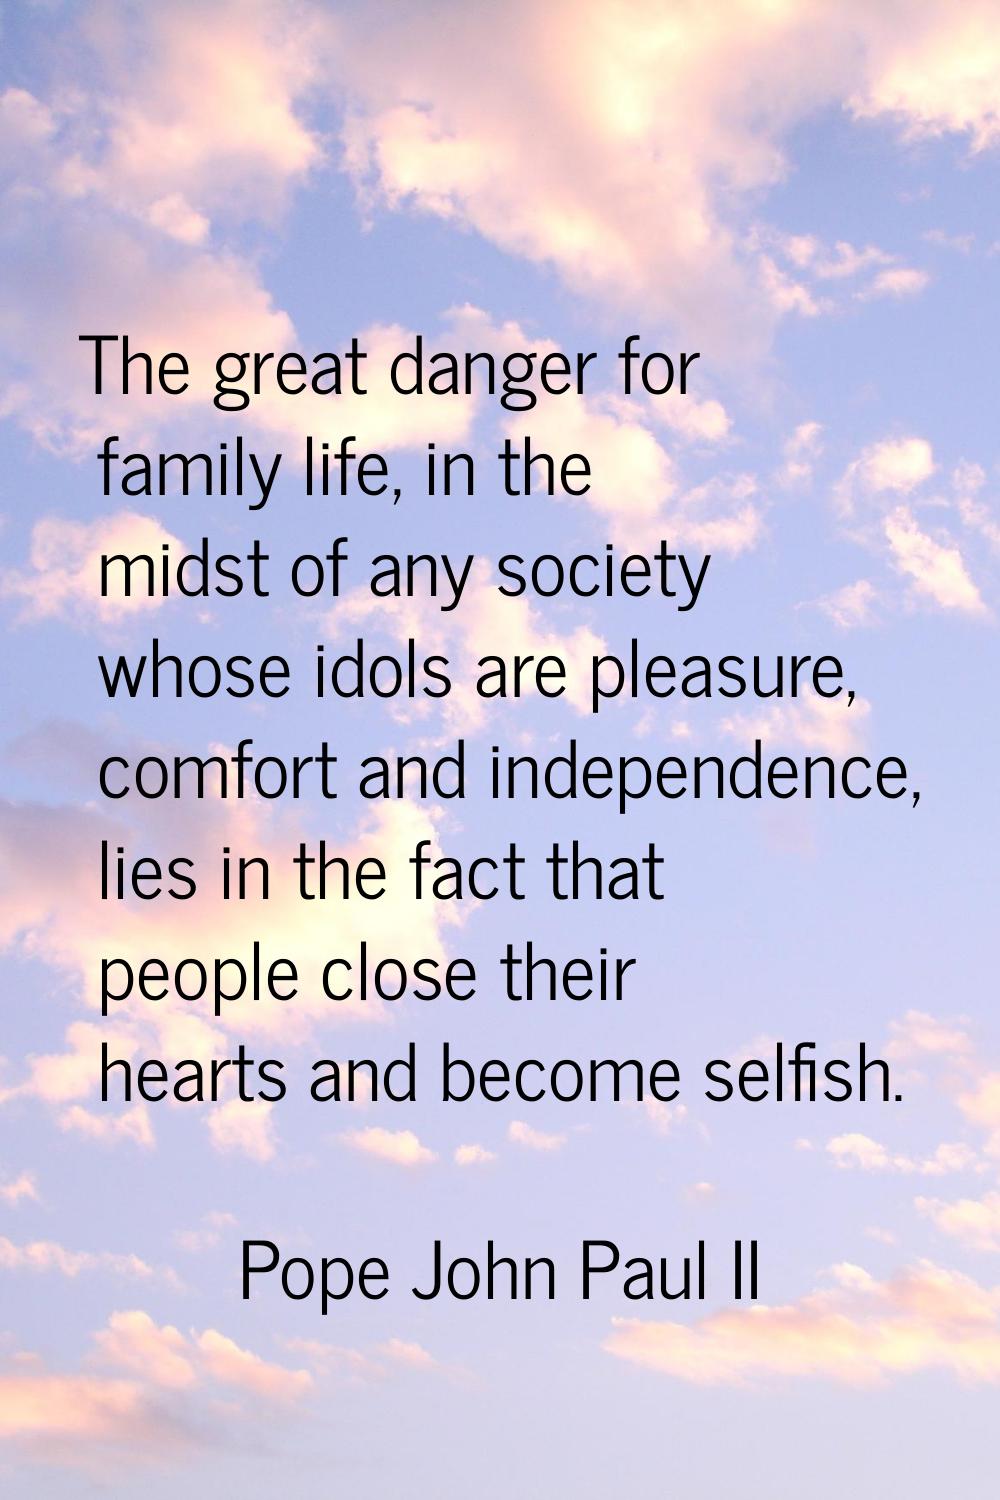 The great danger for family life, in the midst of any society whose idols are pleasure, comfort and